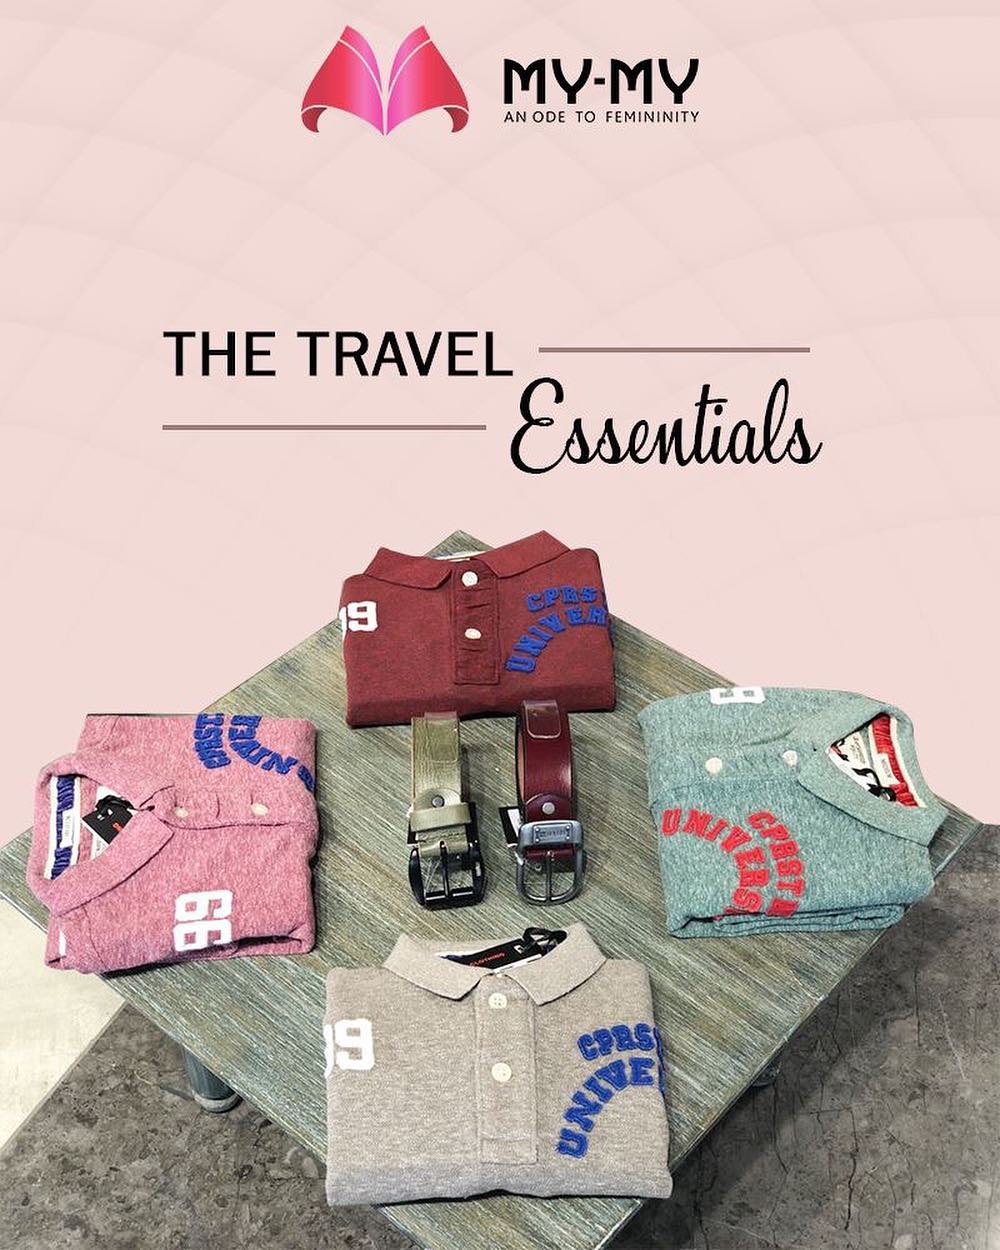 We just cracked the code for the travel-essentials you need this weekend

#SummerWardrobe #MyMy #MyMyAhmedabad #Fashion #Ahmedabad #TravelEssentials